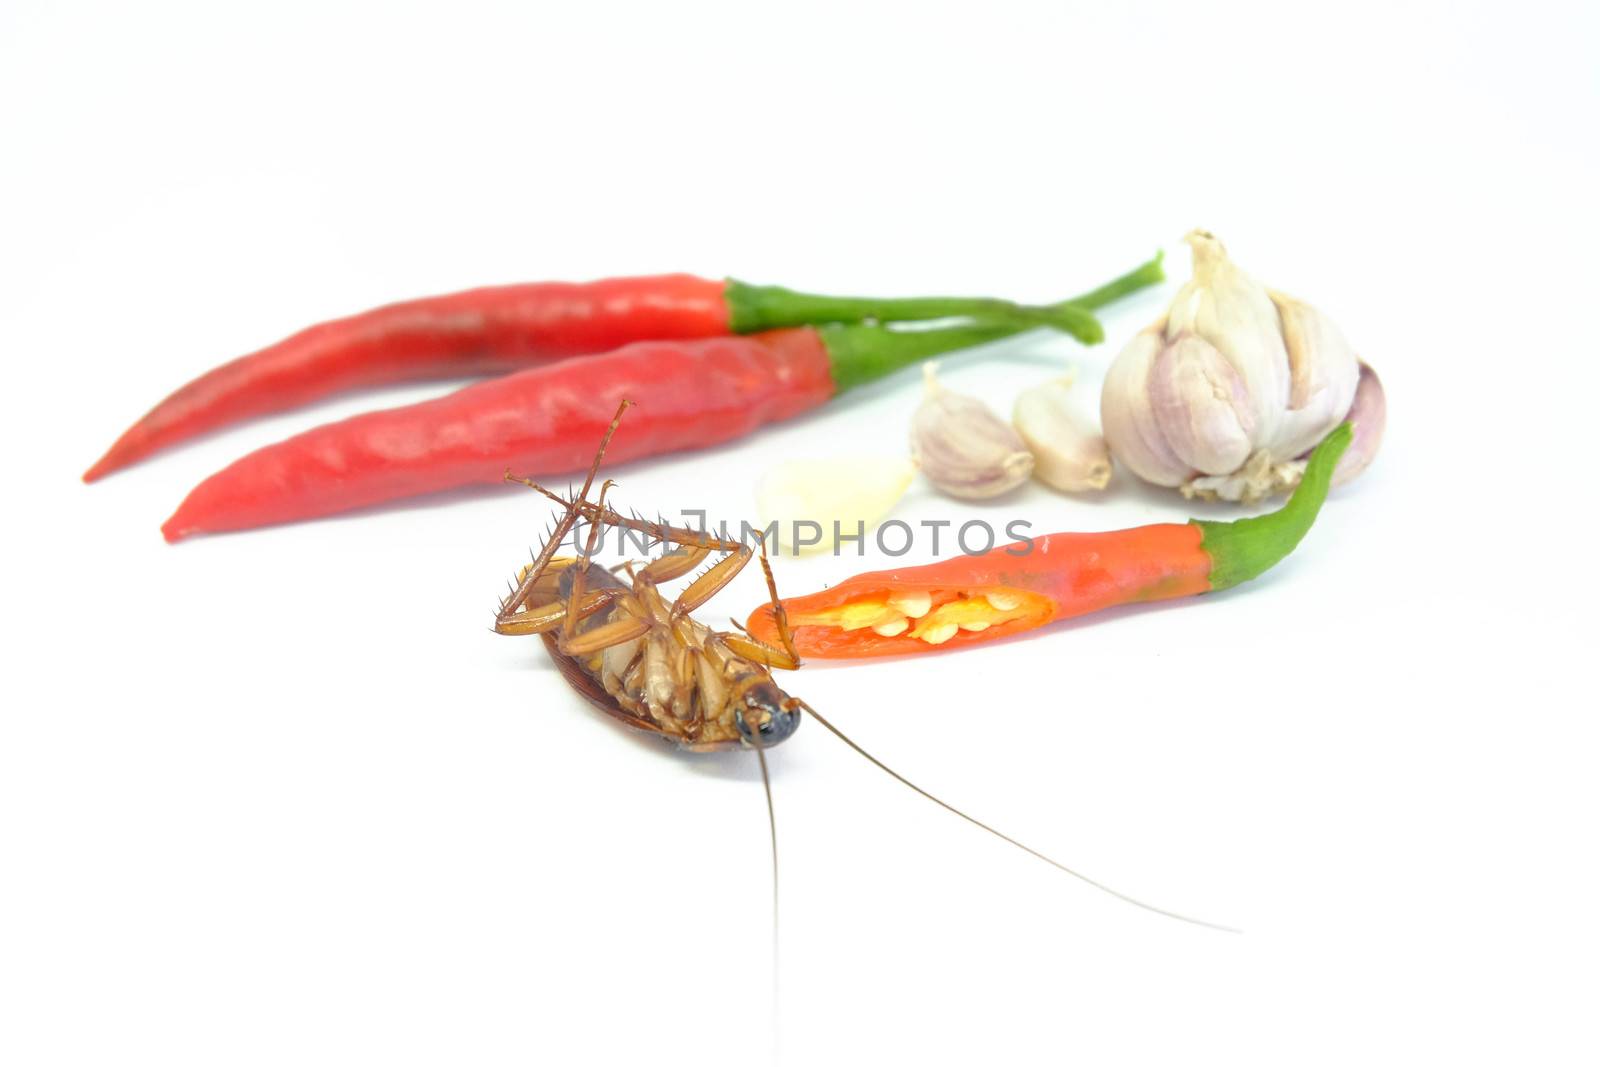 A garlic and chili can chase cockroaches,Close up cockroach chil by e22xua